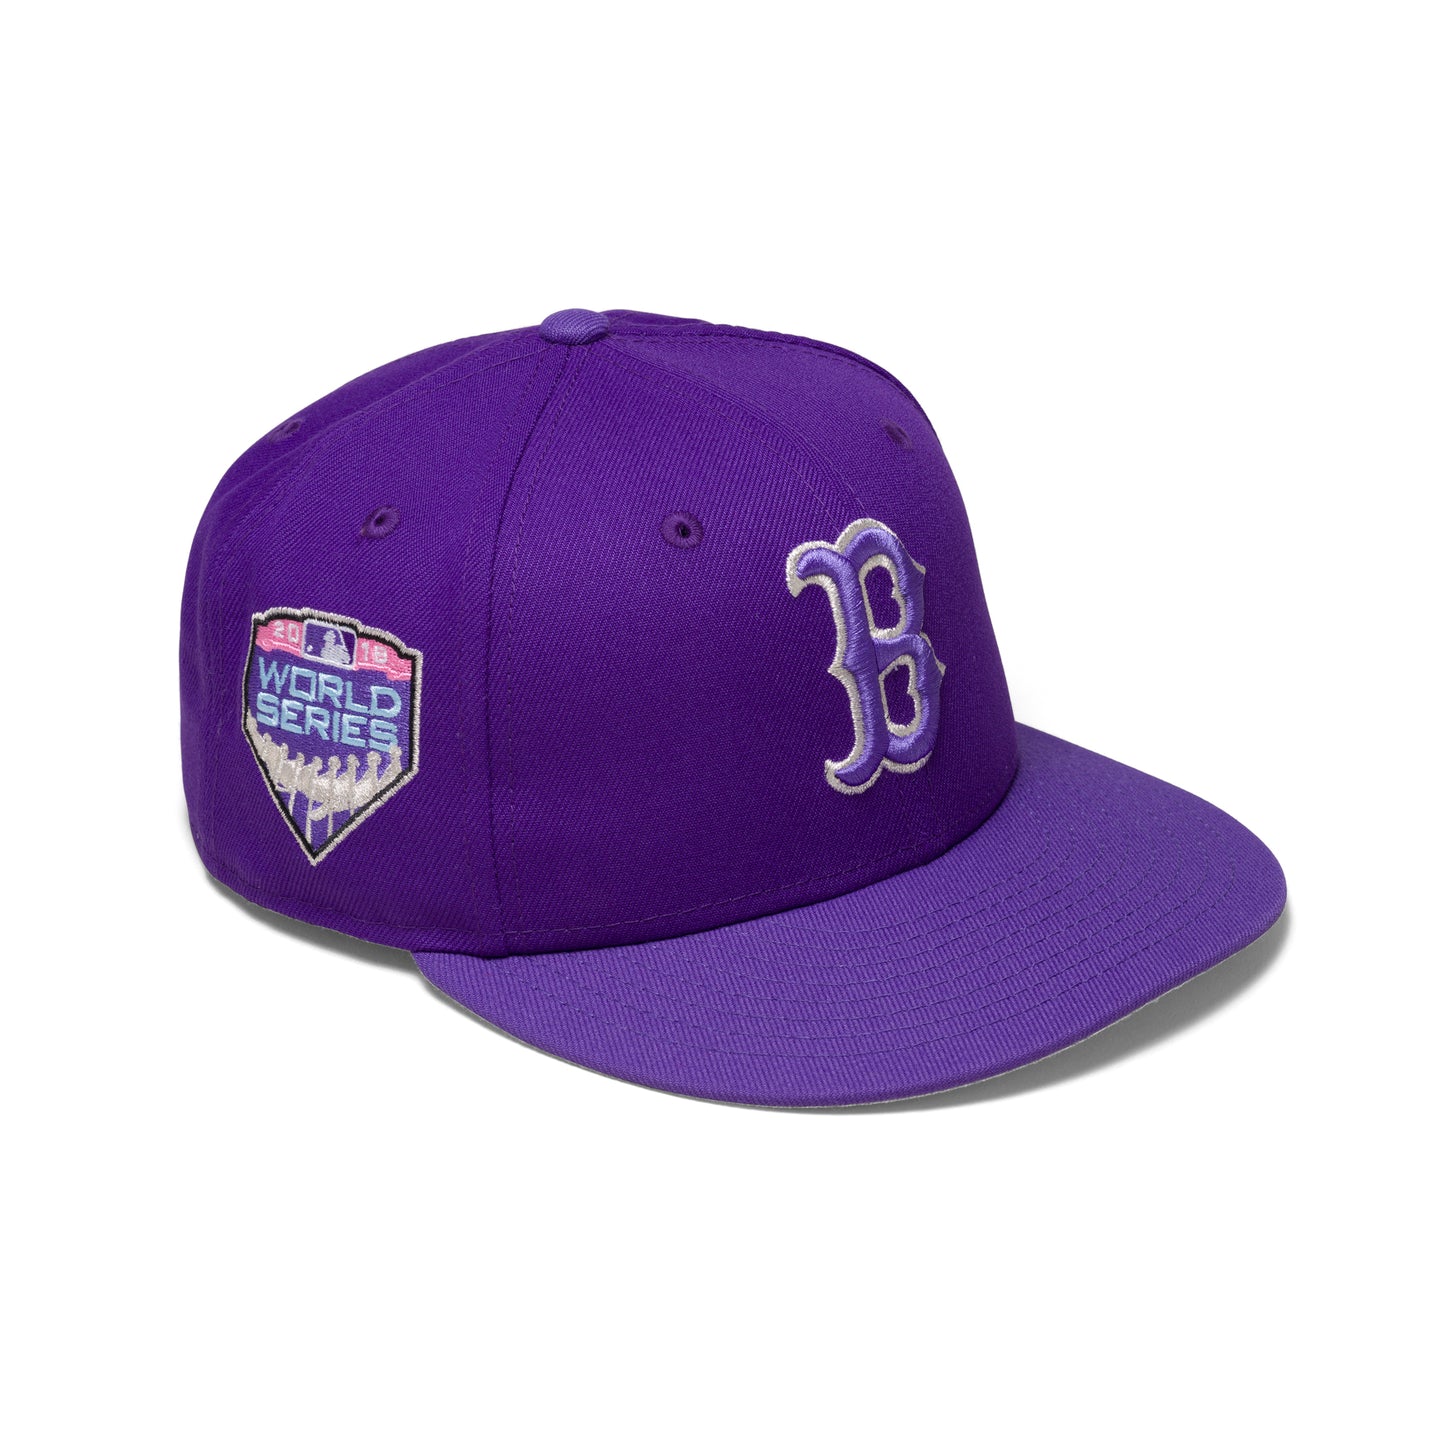 Concepts x New Era 59Fifty Boston Red Sox 2018 World Series Fitted Hat (Purple)